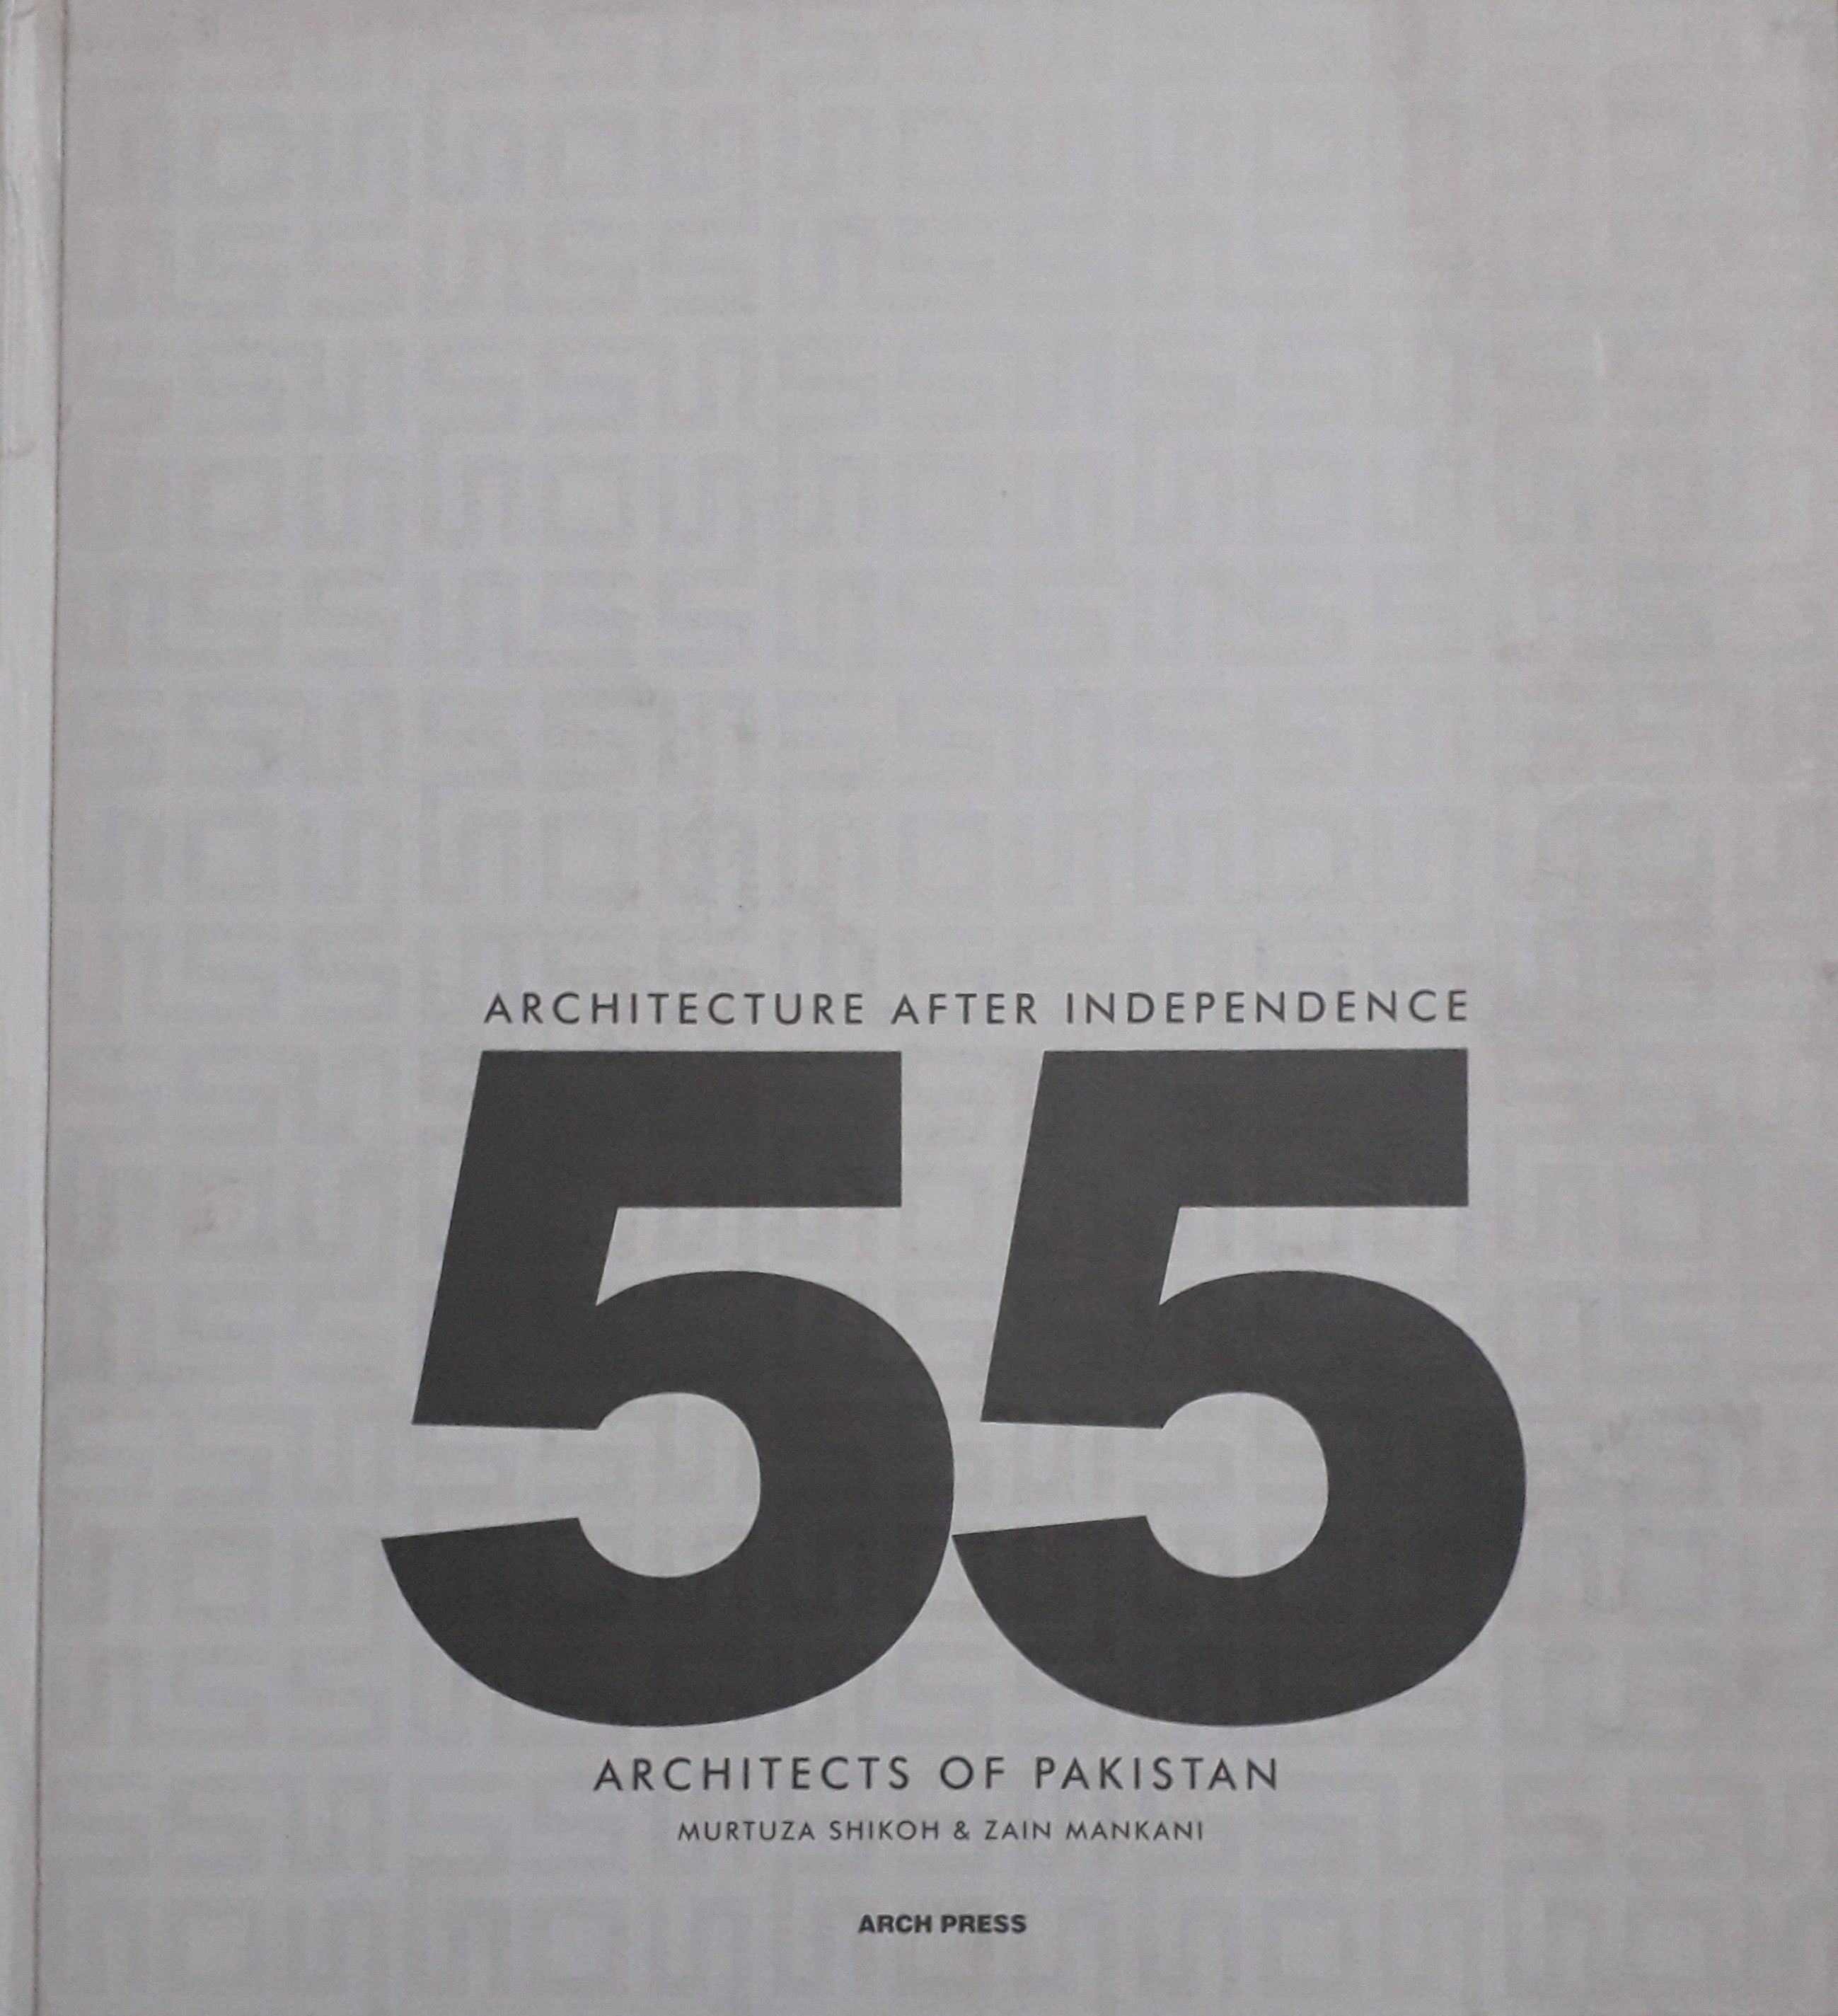 architecture after independence: 55 architects of pakistan